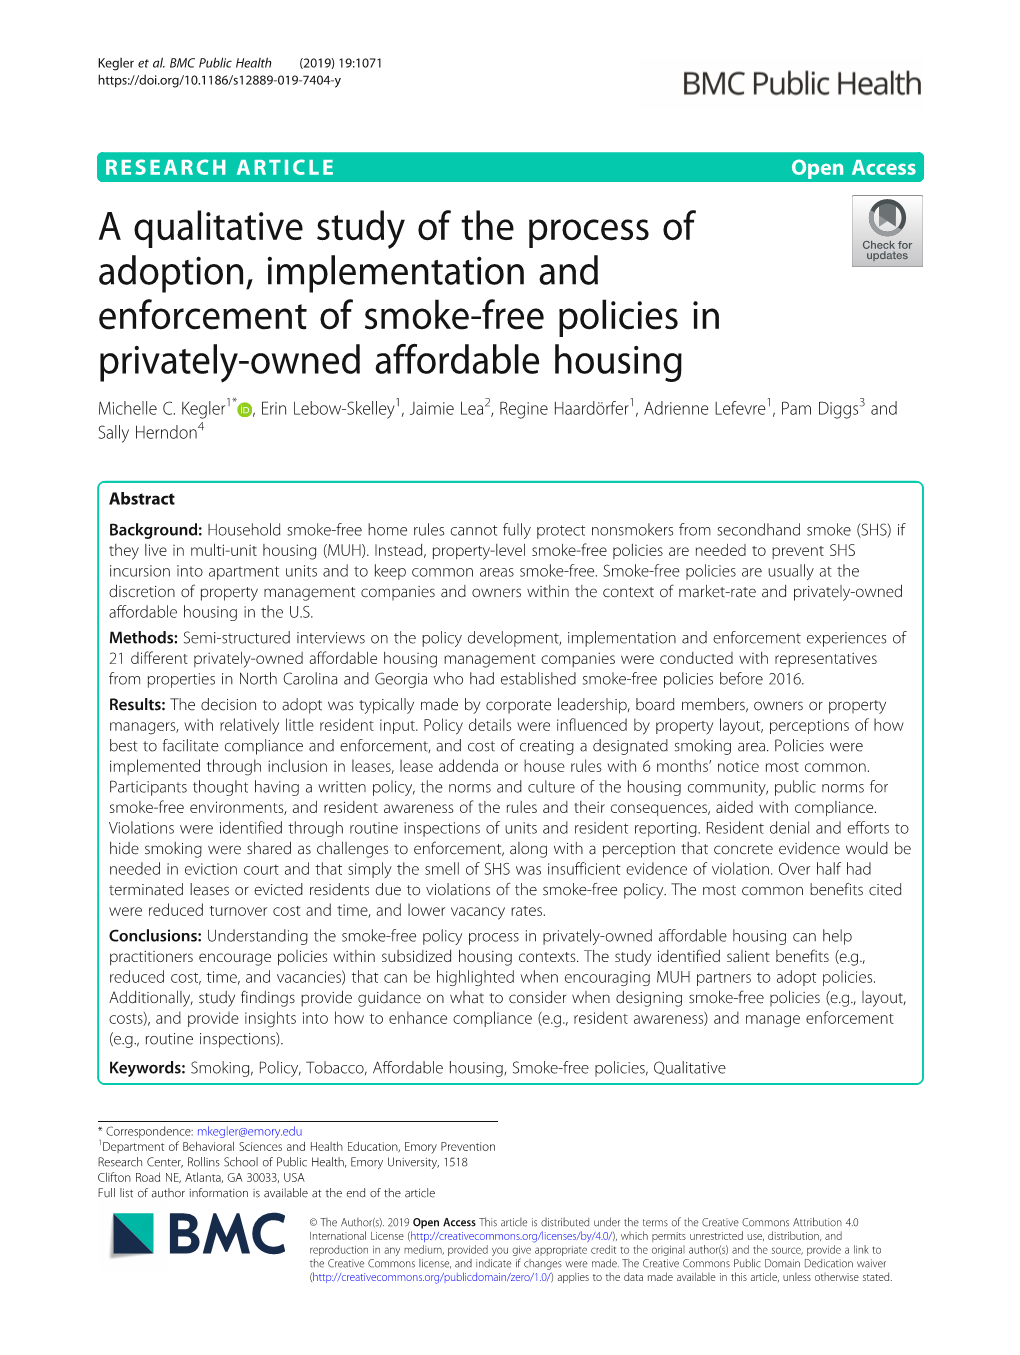 A Qualitative Study of the Process of Adoption, Implementation and Enforcement of Smoke-Free Policies in Privately-Owned Affordable Housing Michelle C